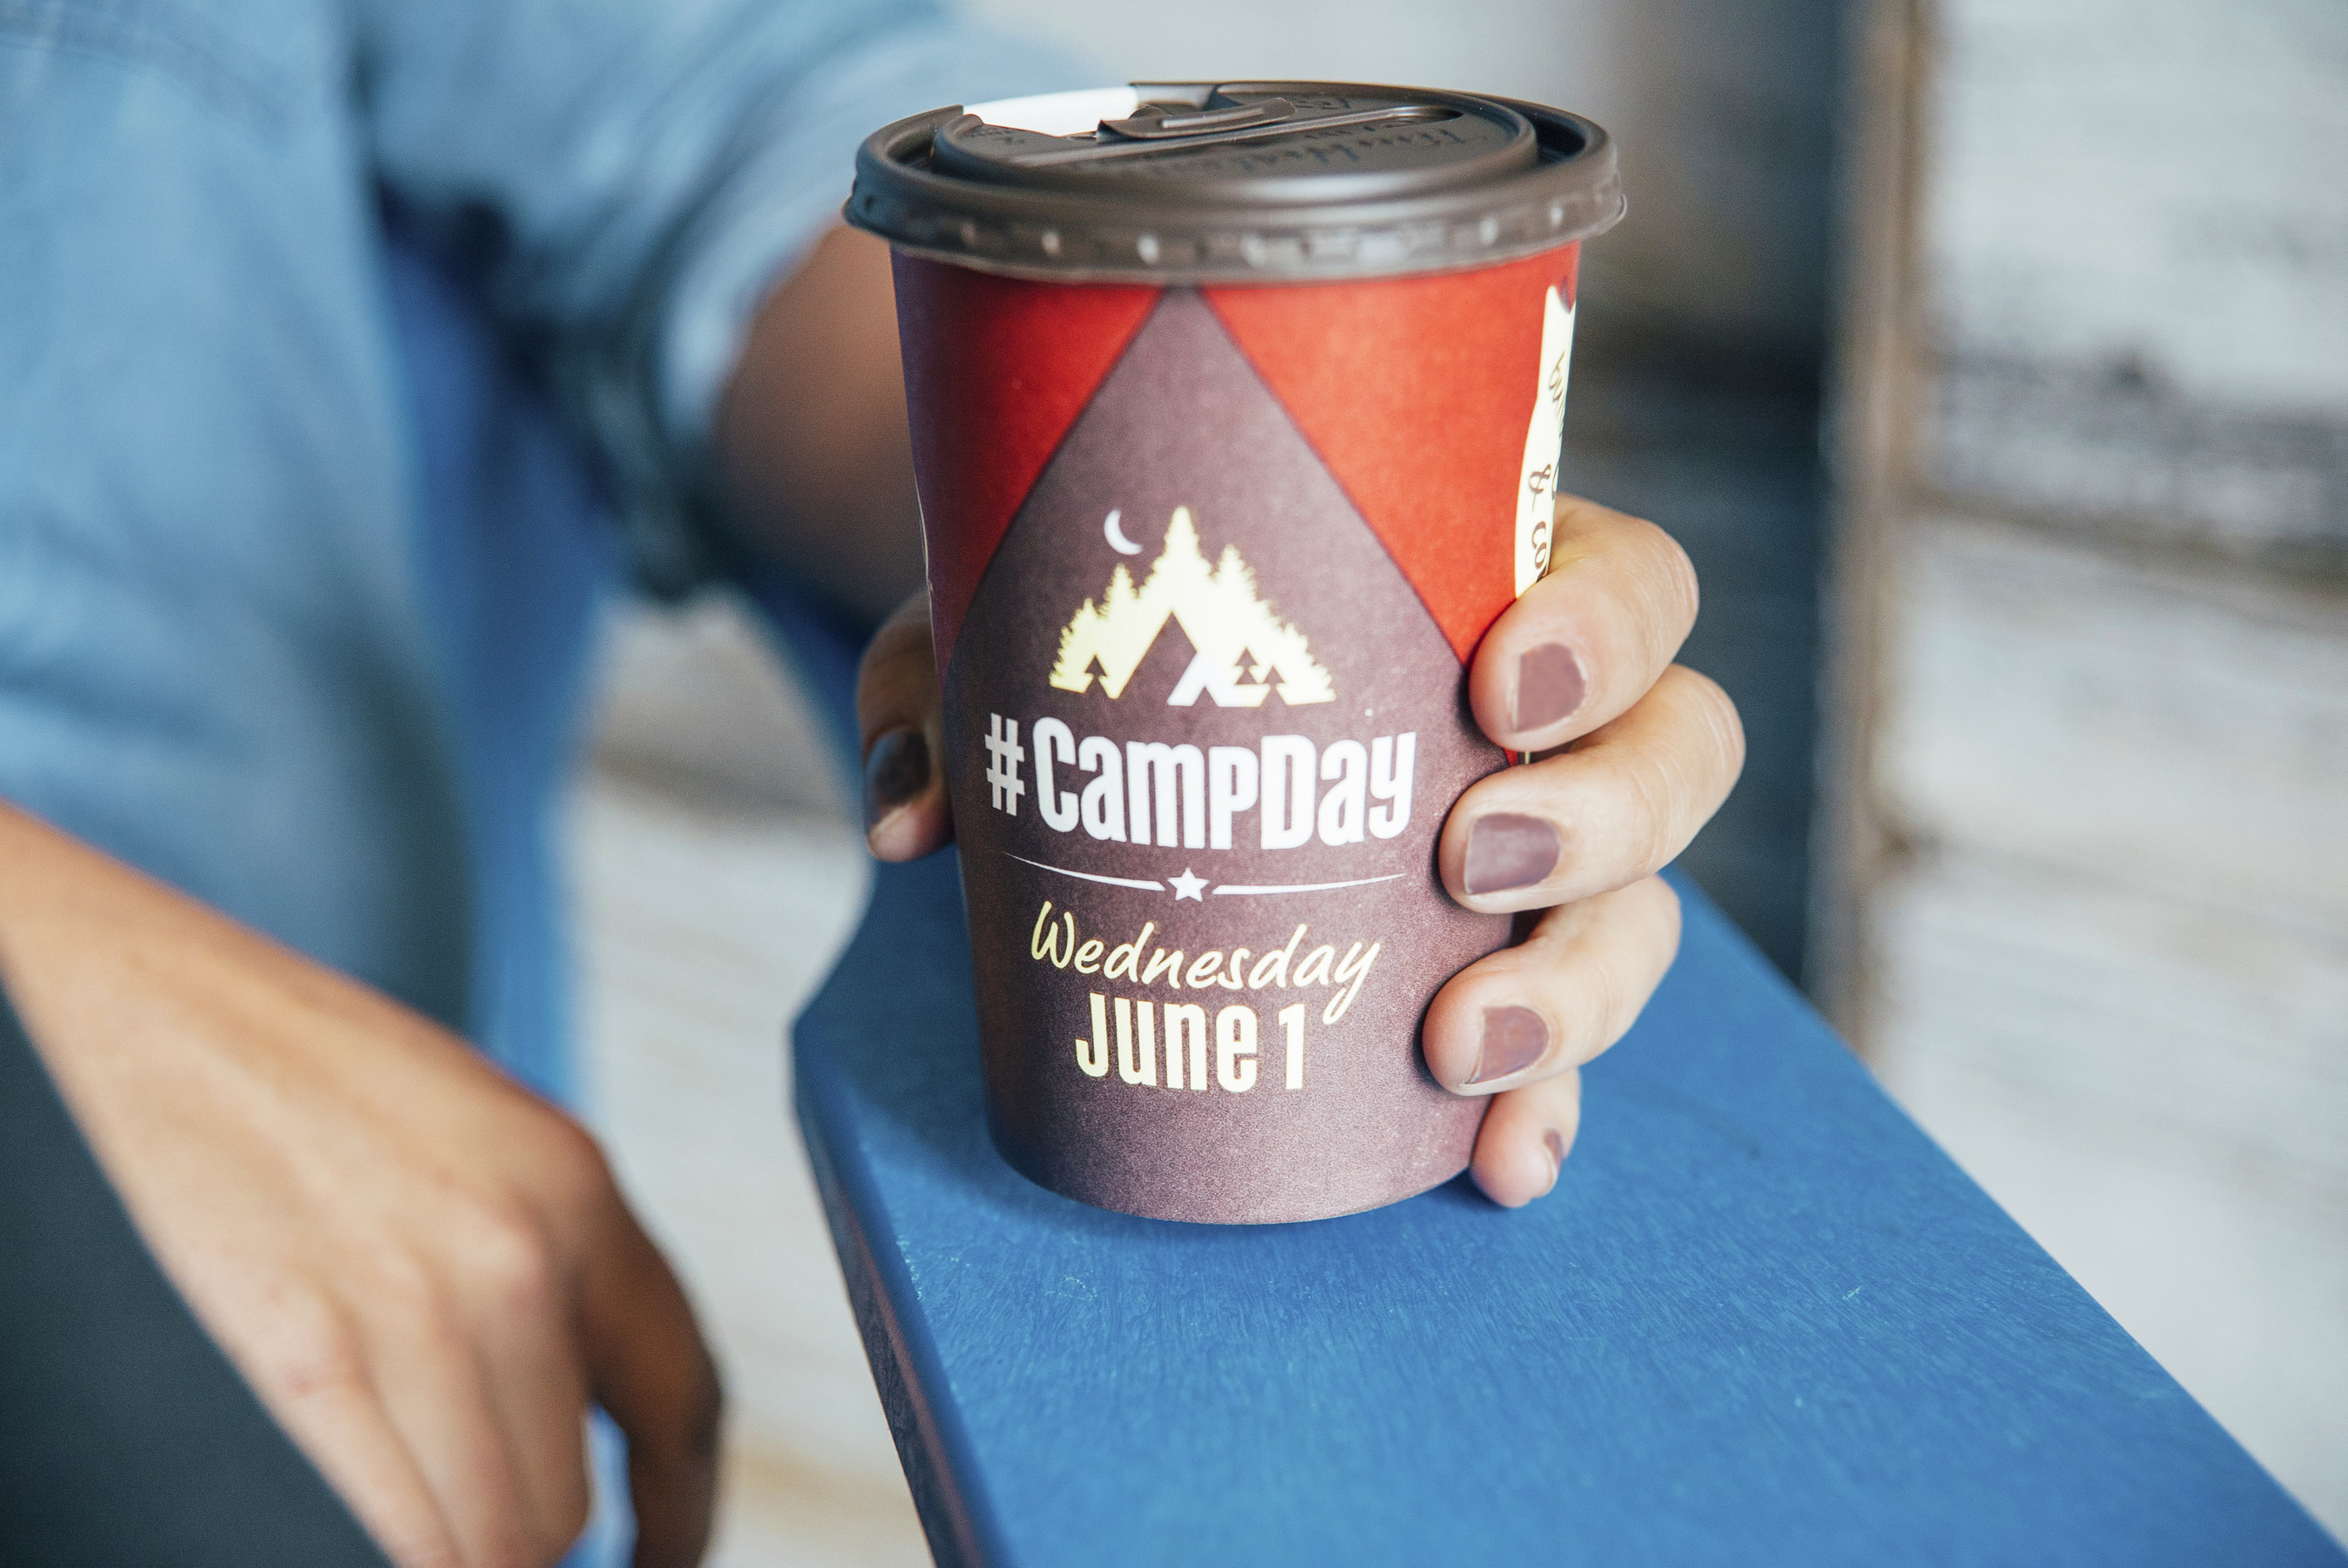 To showcase the benefits of Camp Day, Tim Hortons launched an exciting new red cup design. These cups feature speech bubbles that showcase the impact of what buying a cup of coffee can have on kids' experience at camp including: helping kids believe in themselves, helping to create a brighter future, helping to build courage and confidence, and helping kids to be their best. This year, Guests who want to help to raise awareness about Camp Day can also purchase a red Camp Day bracelet at participating Restaurants for $2 plus tax while supplies last.